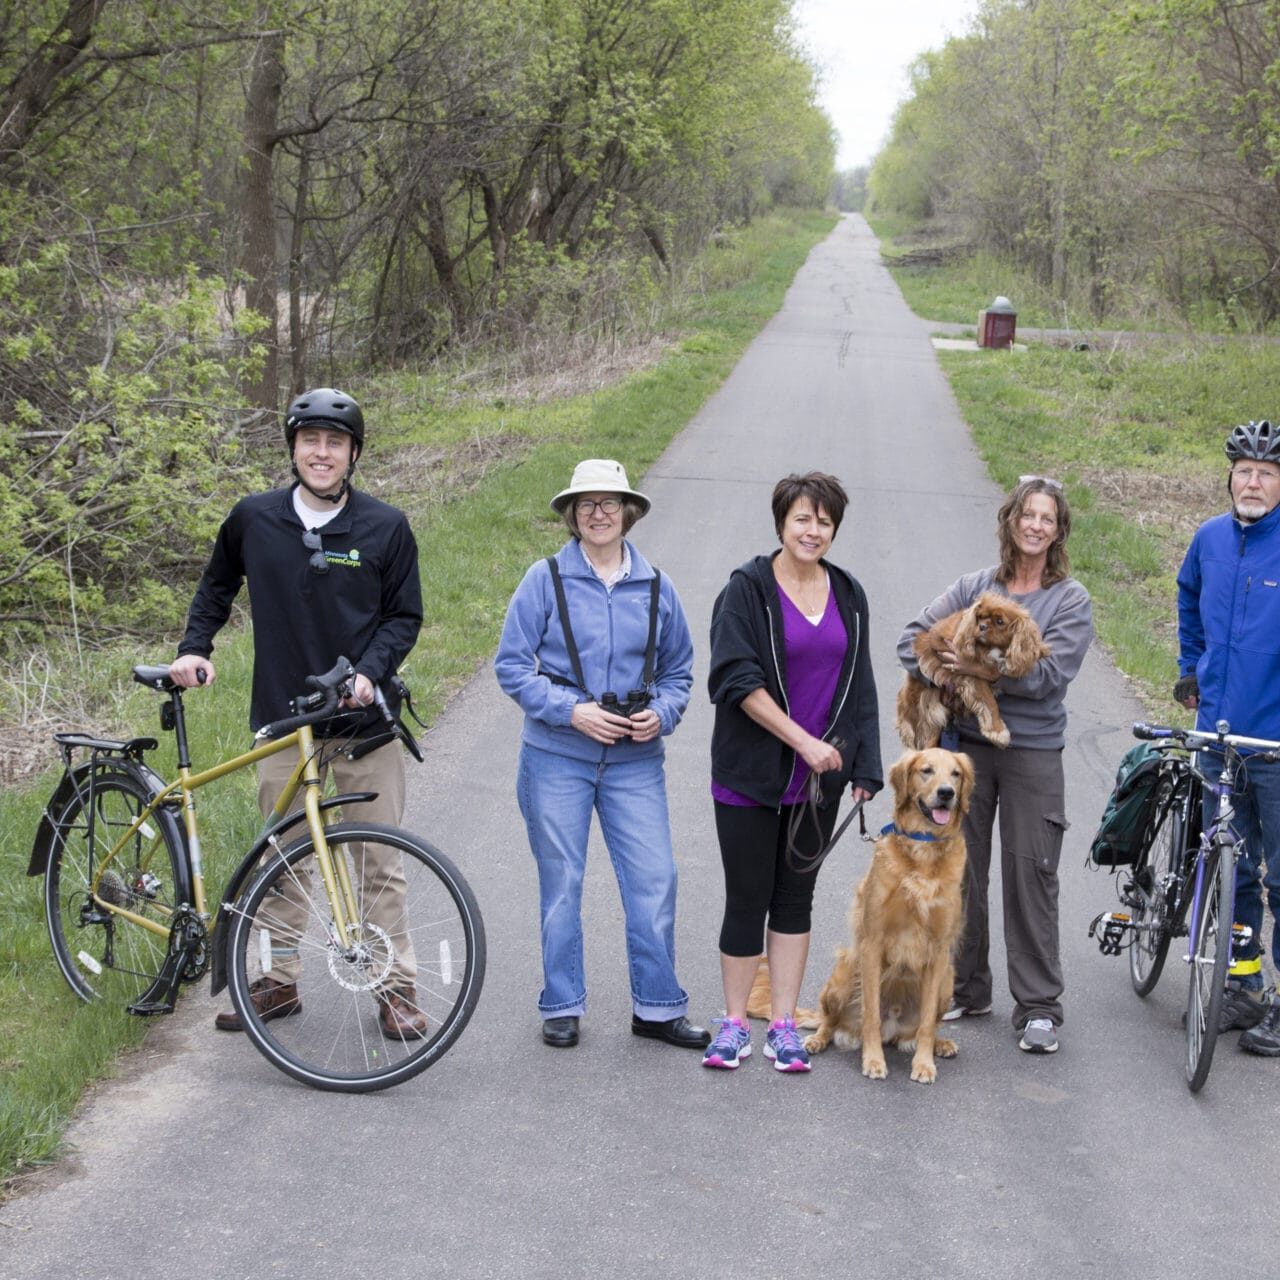 Citizens Standing on Bike Trail